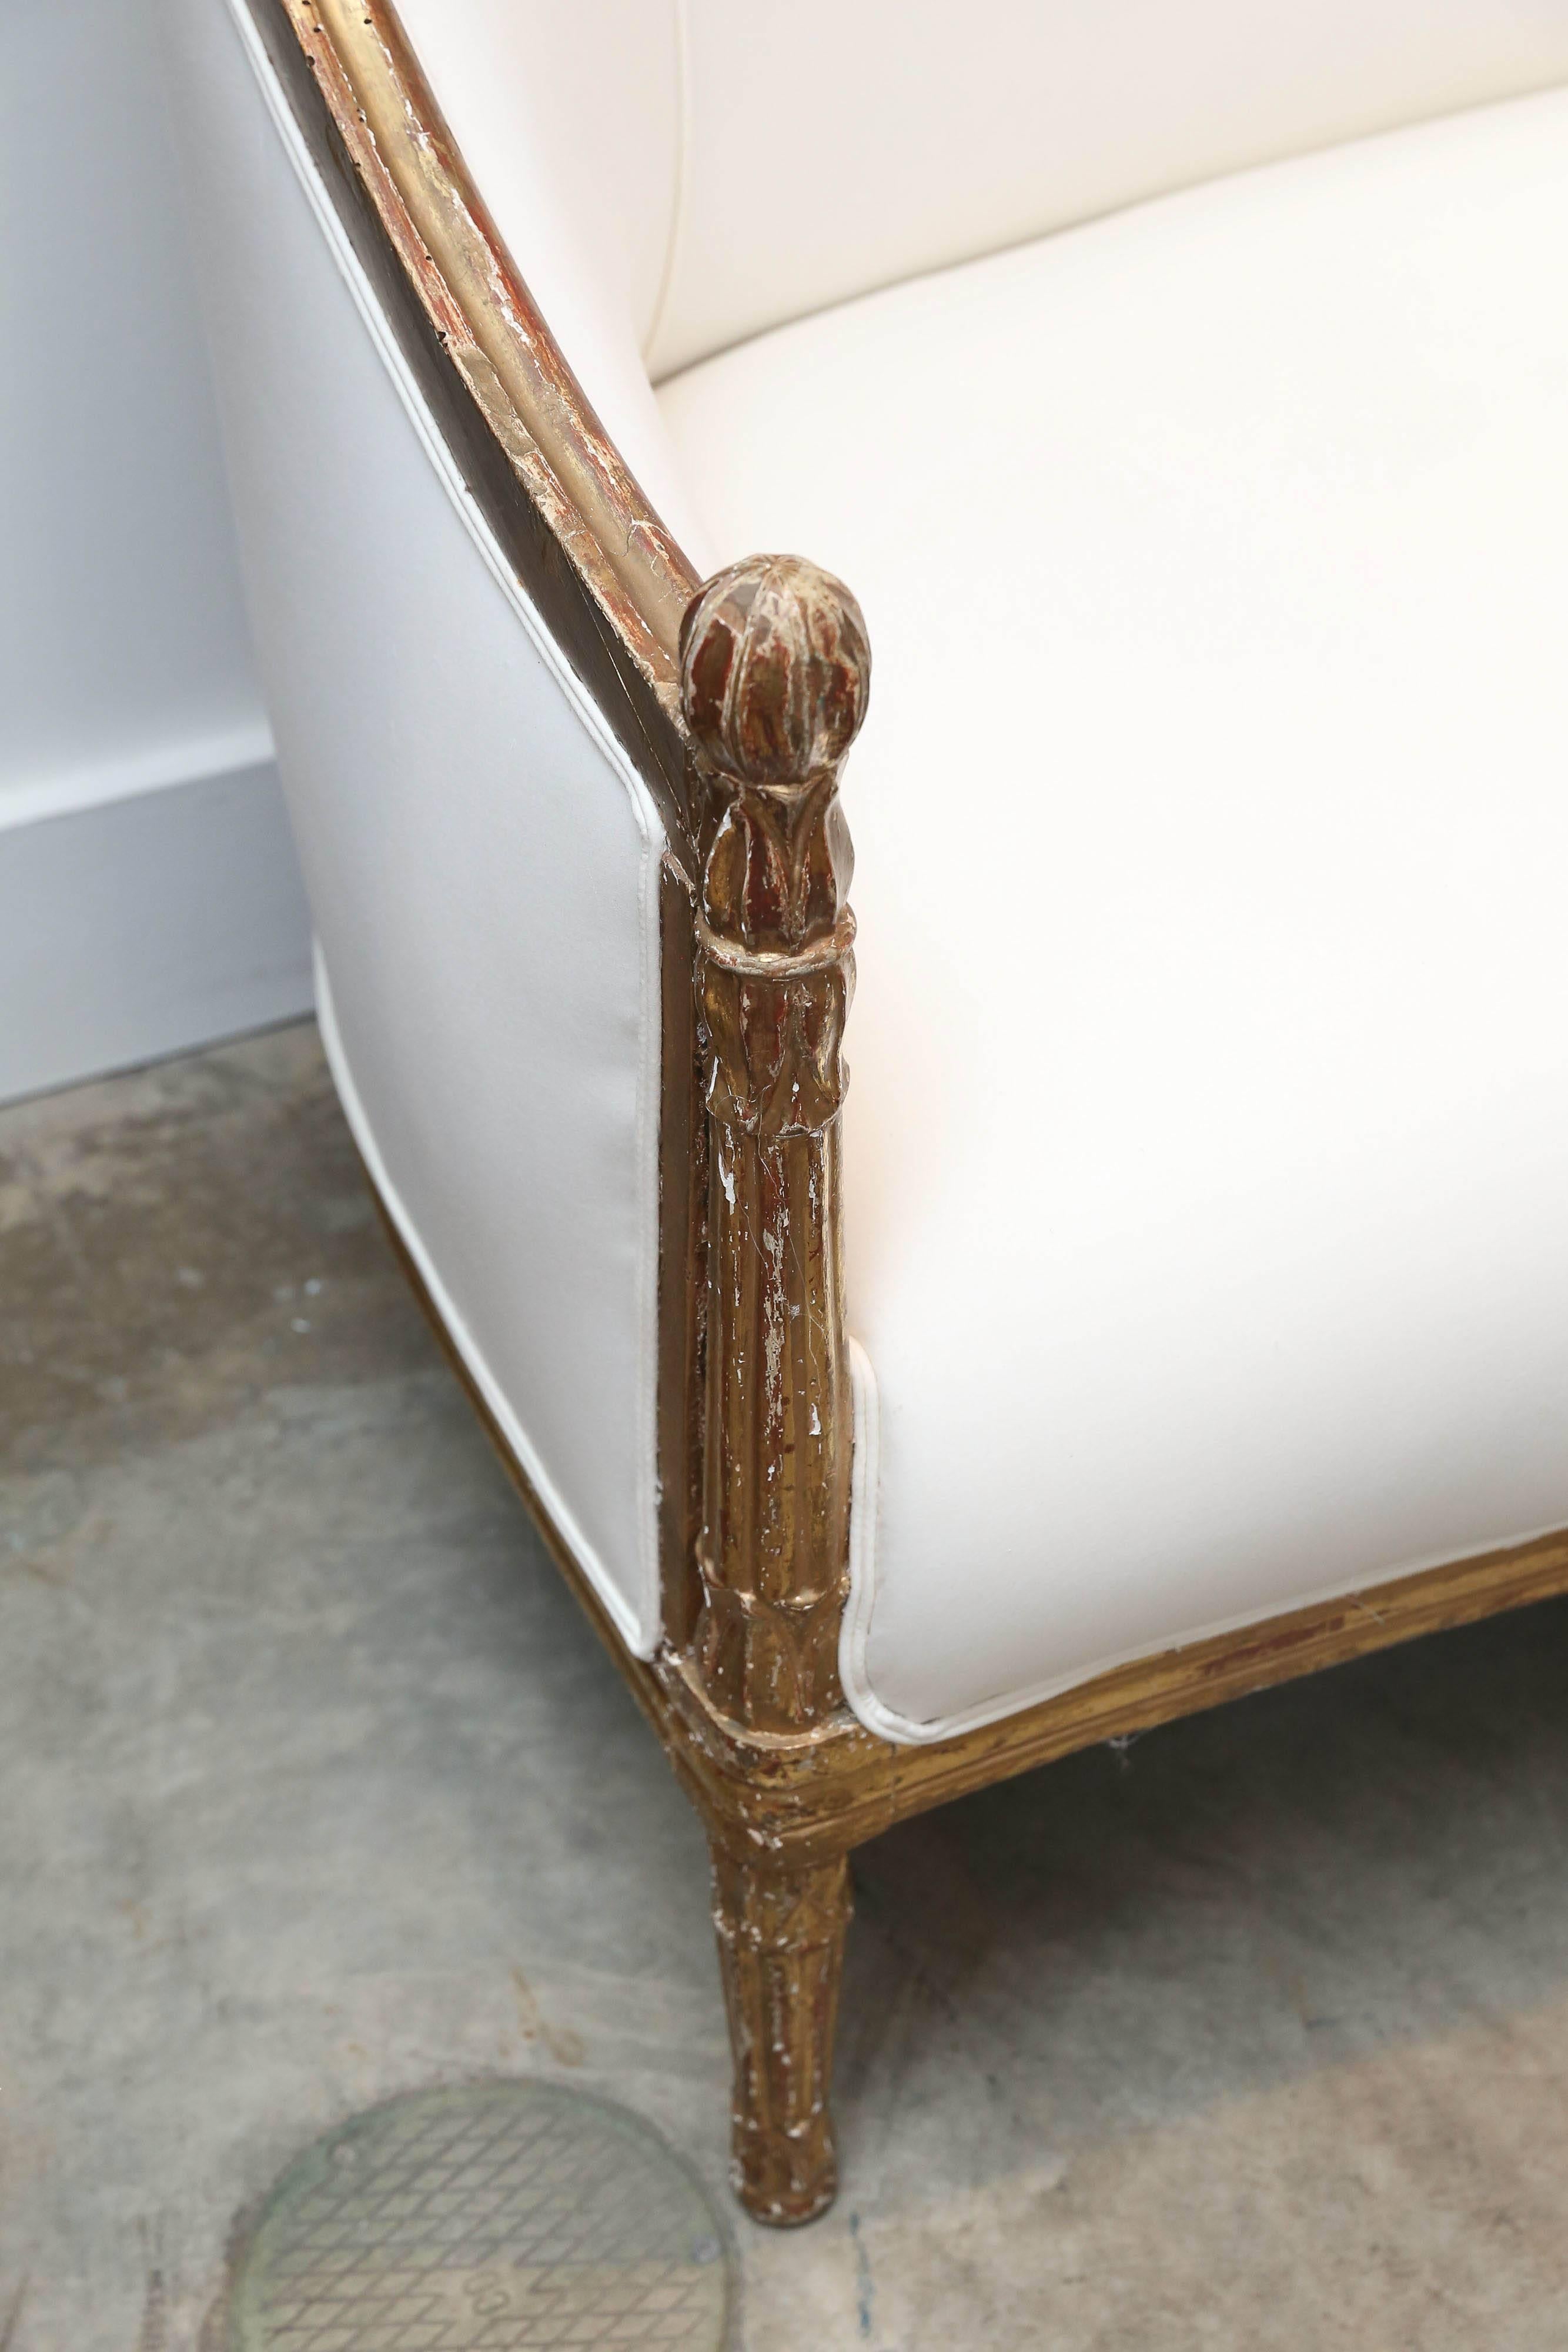 Antique 19th century giltwood settee that we have reupholstered. Details on the carved wooden frame include a floral detail and round post handles on the arms. Beautiful gilt color.